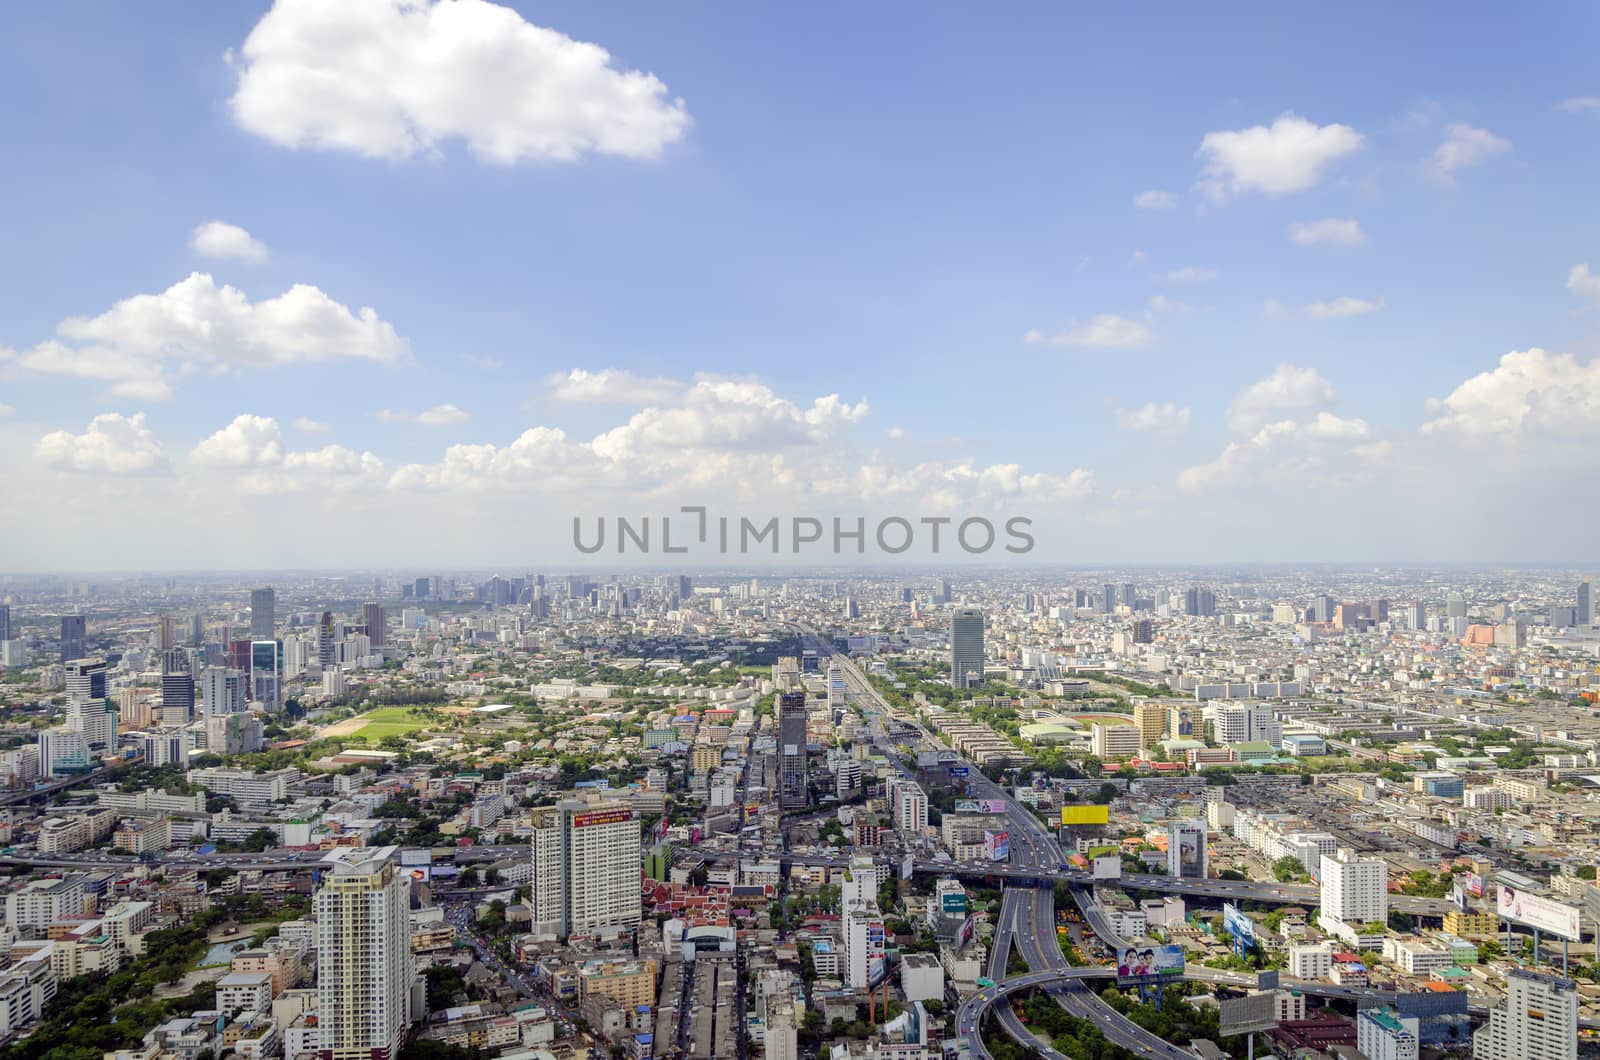 bangkok view from baiyoke tower II on 3 July 2014 BANGKOK - July 3: Baiyok Tower II is the tallest building in Thailand with 328.4 m. july 3, 2014 in Bangkok, Thailand